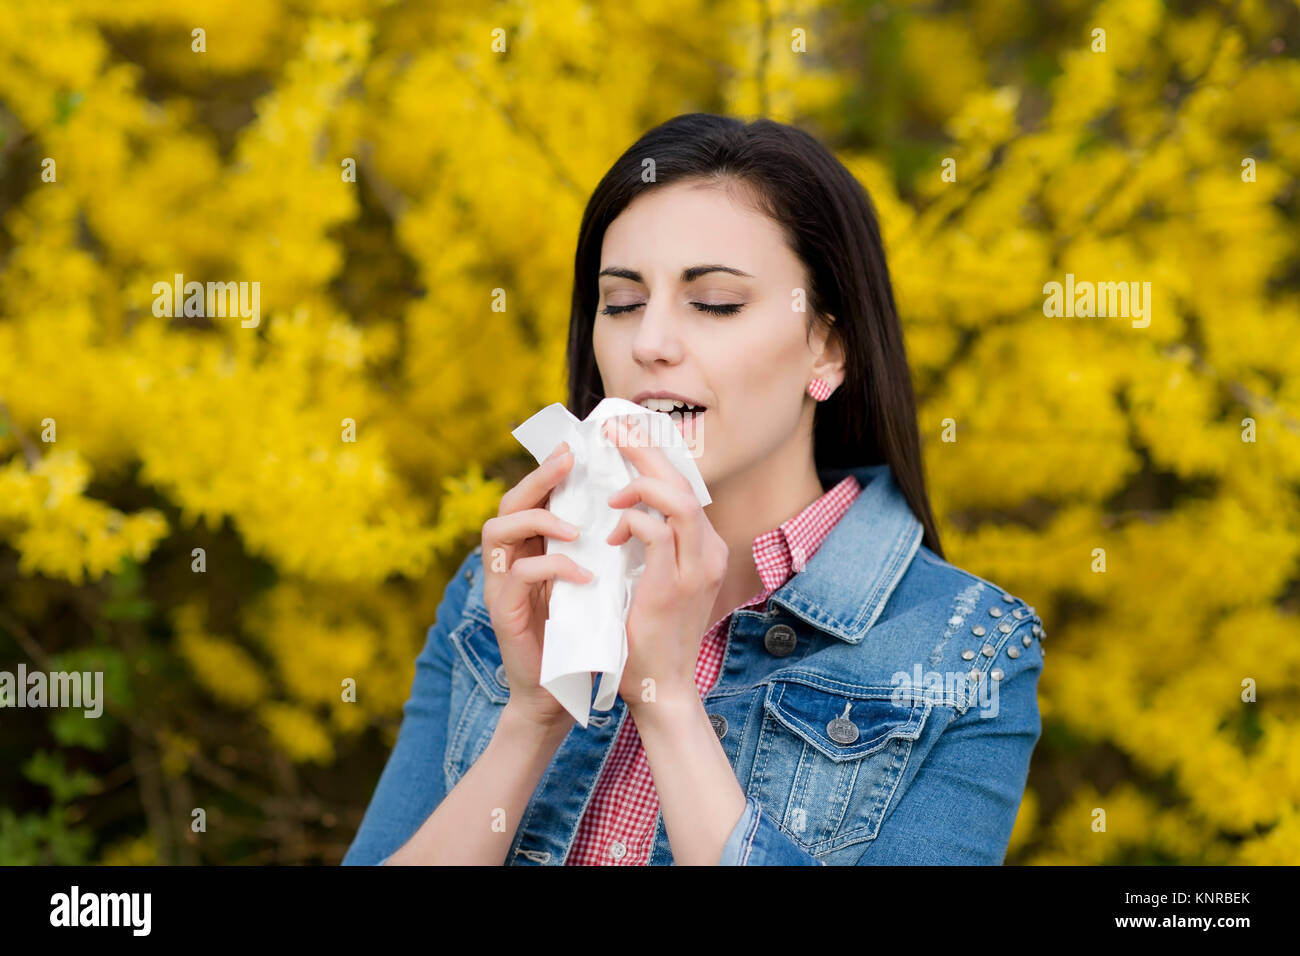 Junge Frau mit Allergie - woman with allergy Stock Photo